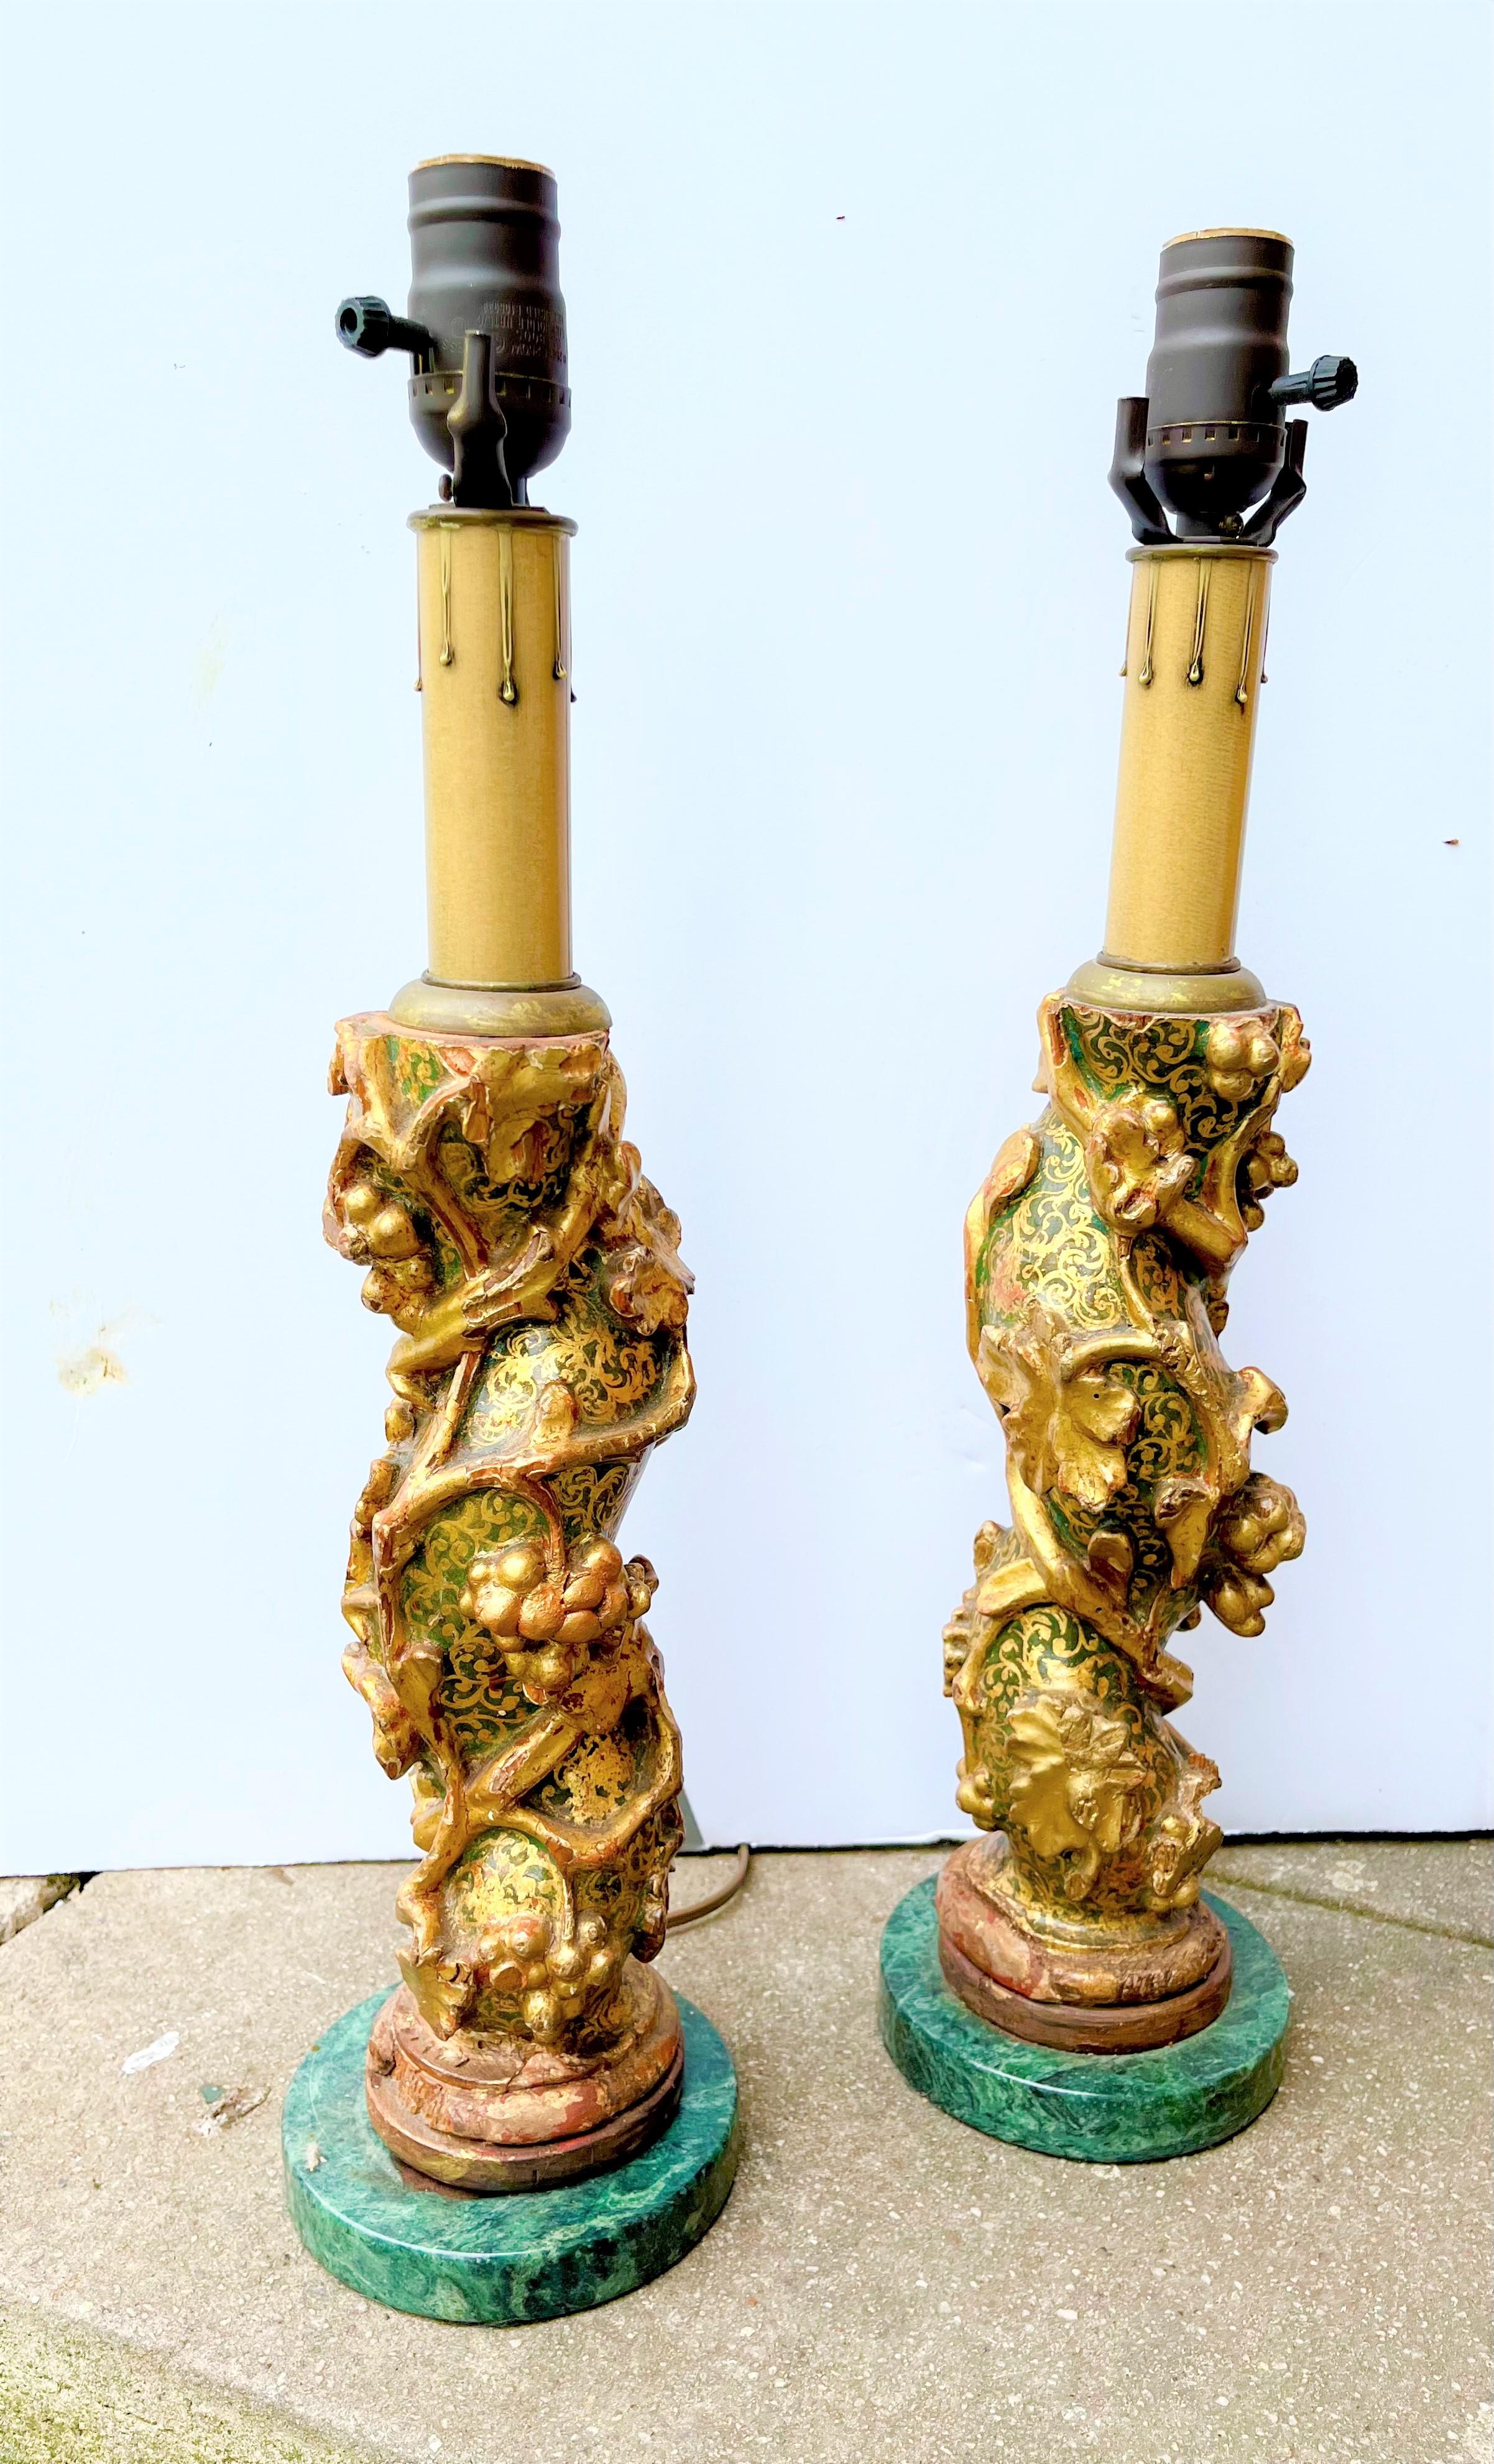 Pair of Venetian (Italian) Solomonic form columnar fragments (probably stair spindles ) now mounted as lamps on later marble bases . Typical grape & vine motif against an unusual green and gilt ground in glossy enamel paint .Typical chips , losses